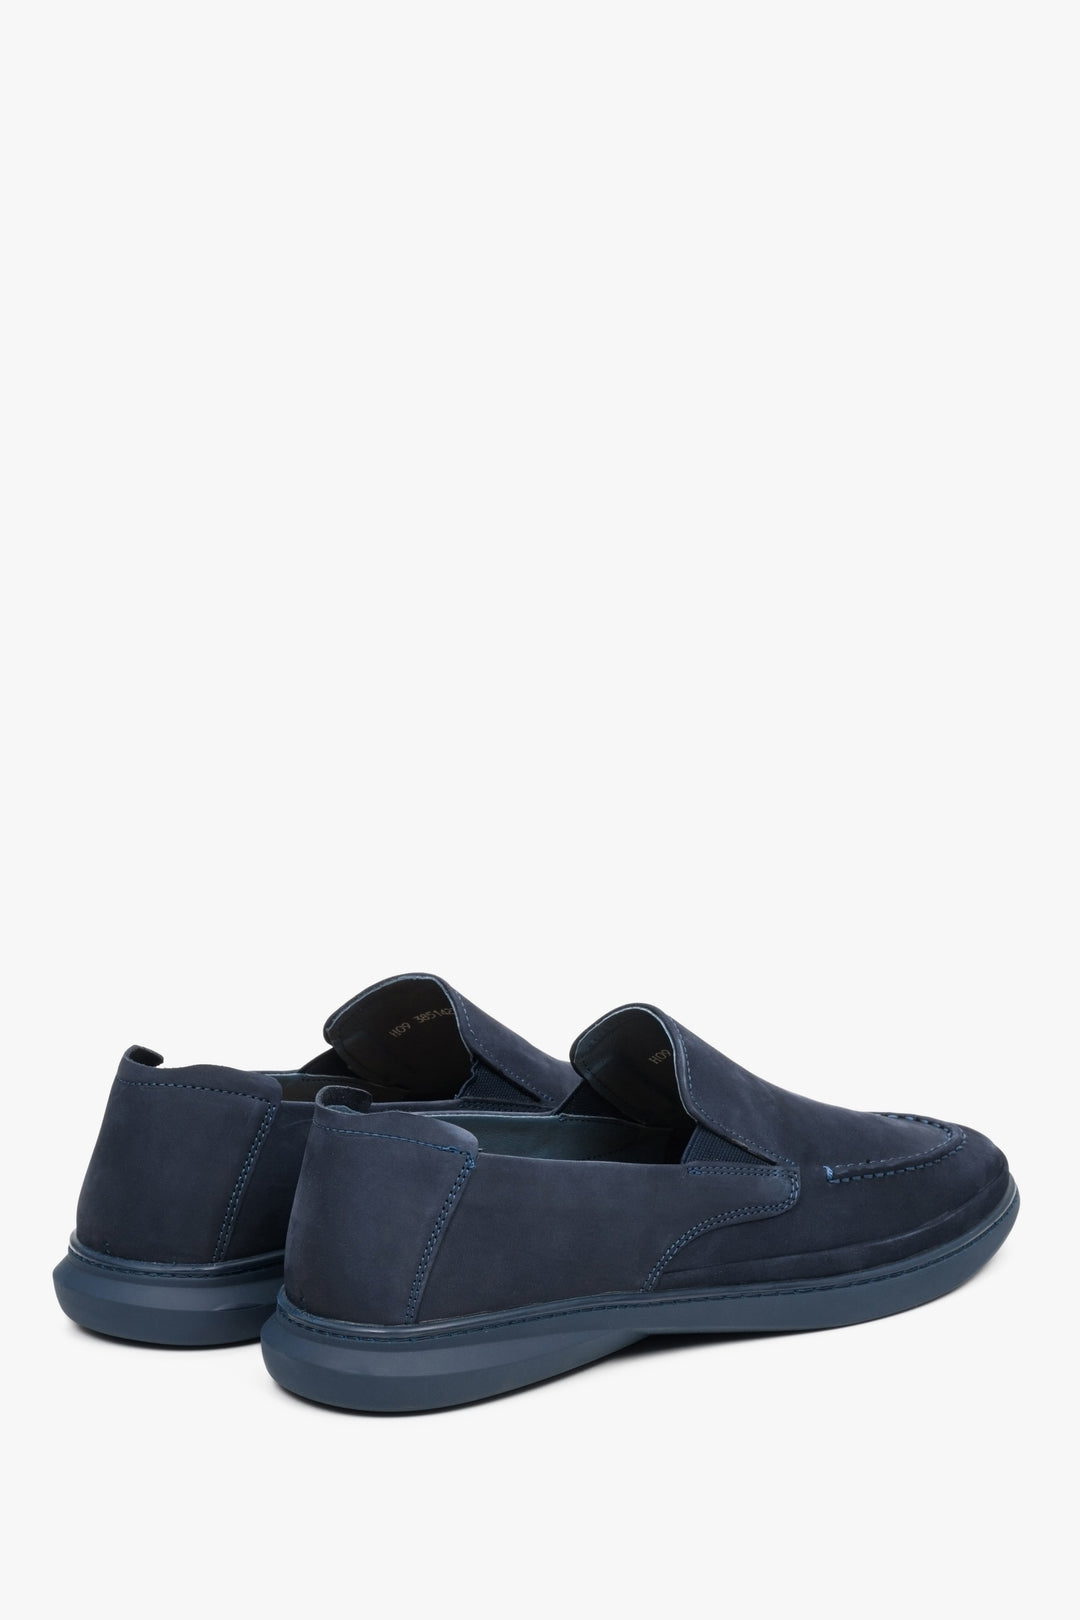 Estro men's nubuck moccasins in blue - close-up on the back and side of the shoe.